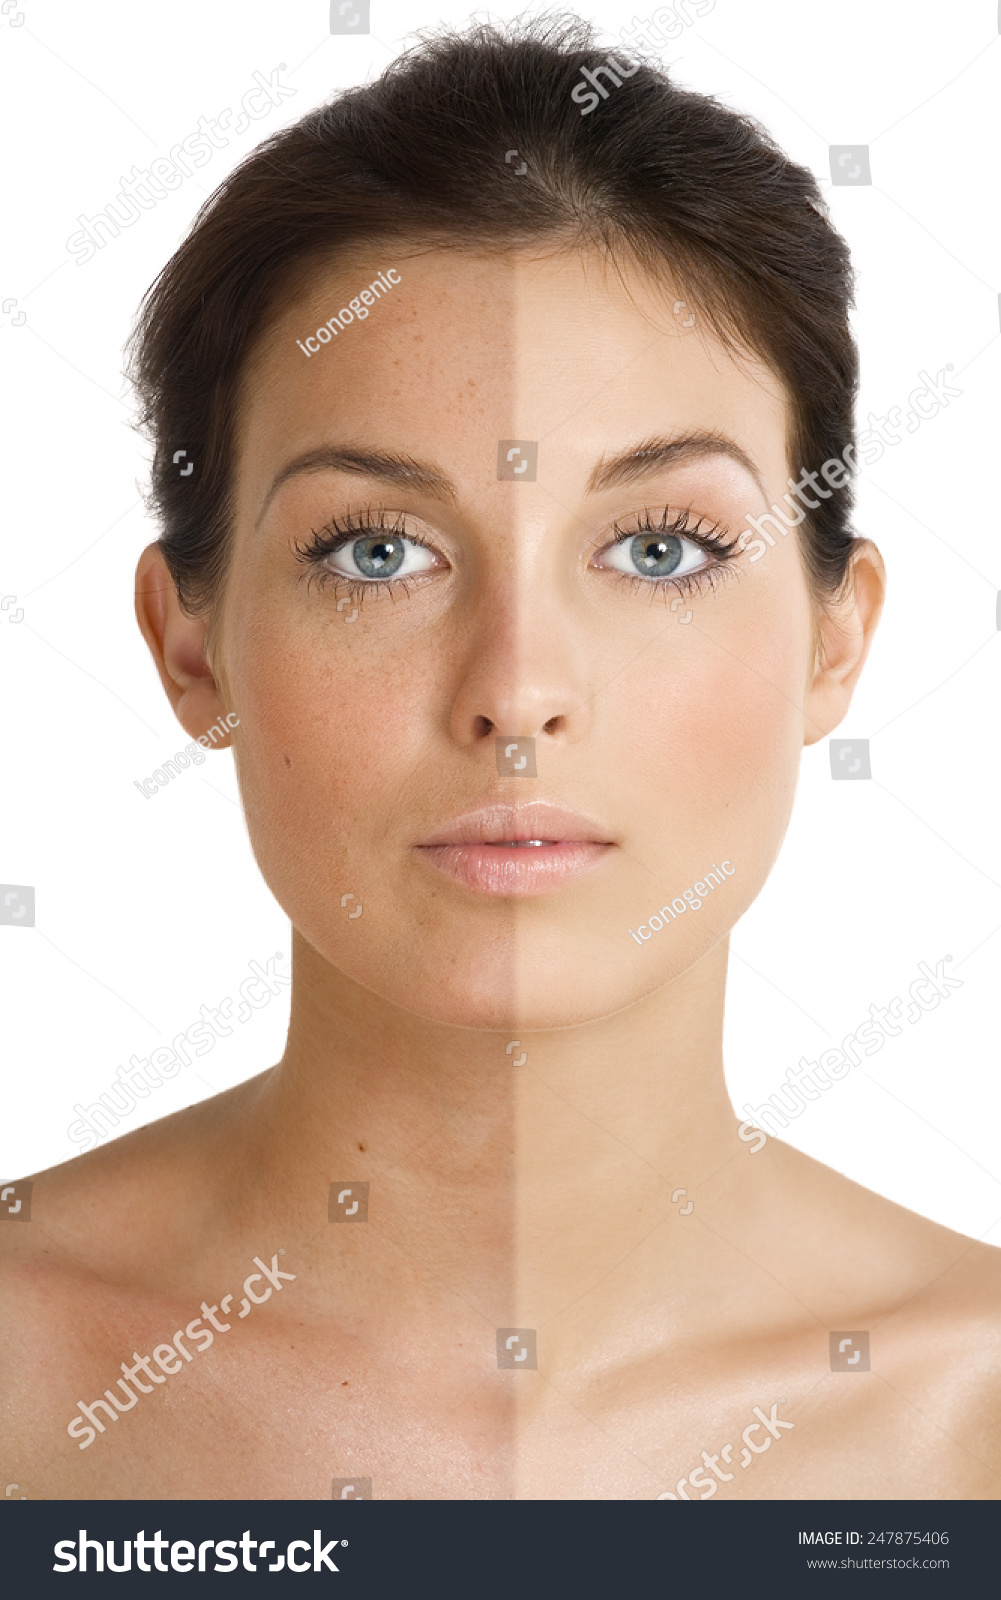 Female face <b>divided into</b> two parts one healthy and one UV damaged. - stock-photo-female-face-divided-into-two-parts-one-healthy-and-one-uv-damaged-247875406